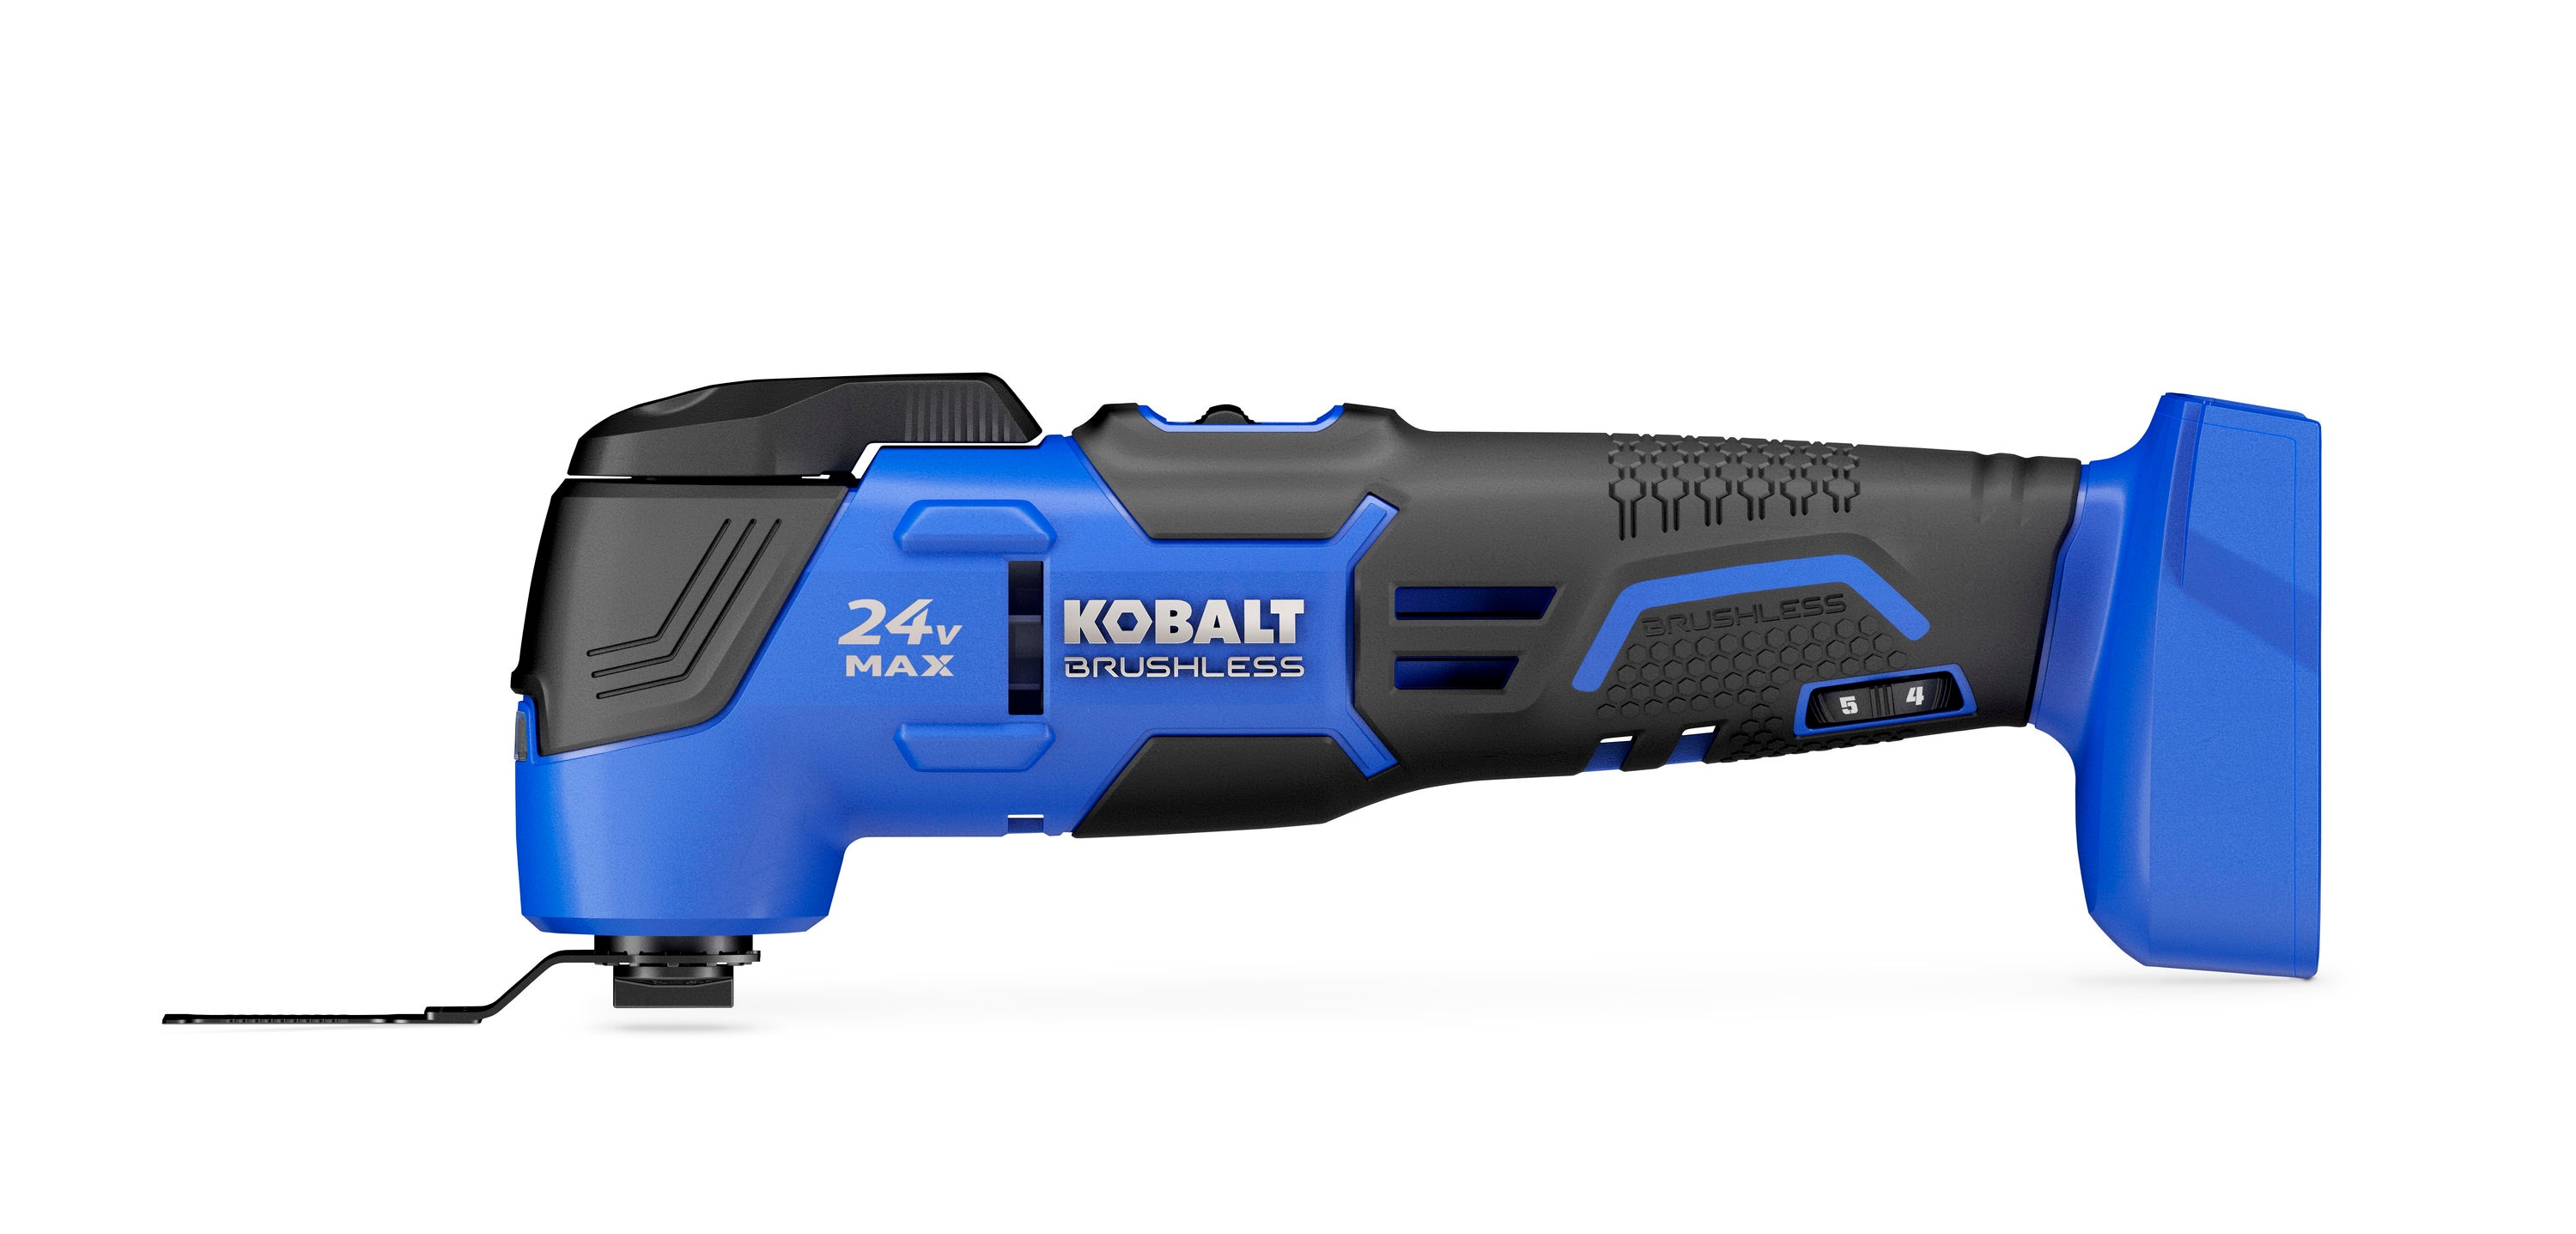 **YMMV** Kobalt 18-Piece Brushless 24-volt Max Variable Speed Oscillating Multi-Tool Kit with Soft Case | KMT 124B-03 **TOOL ONLY** $39.57